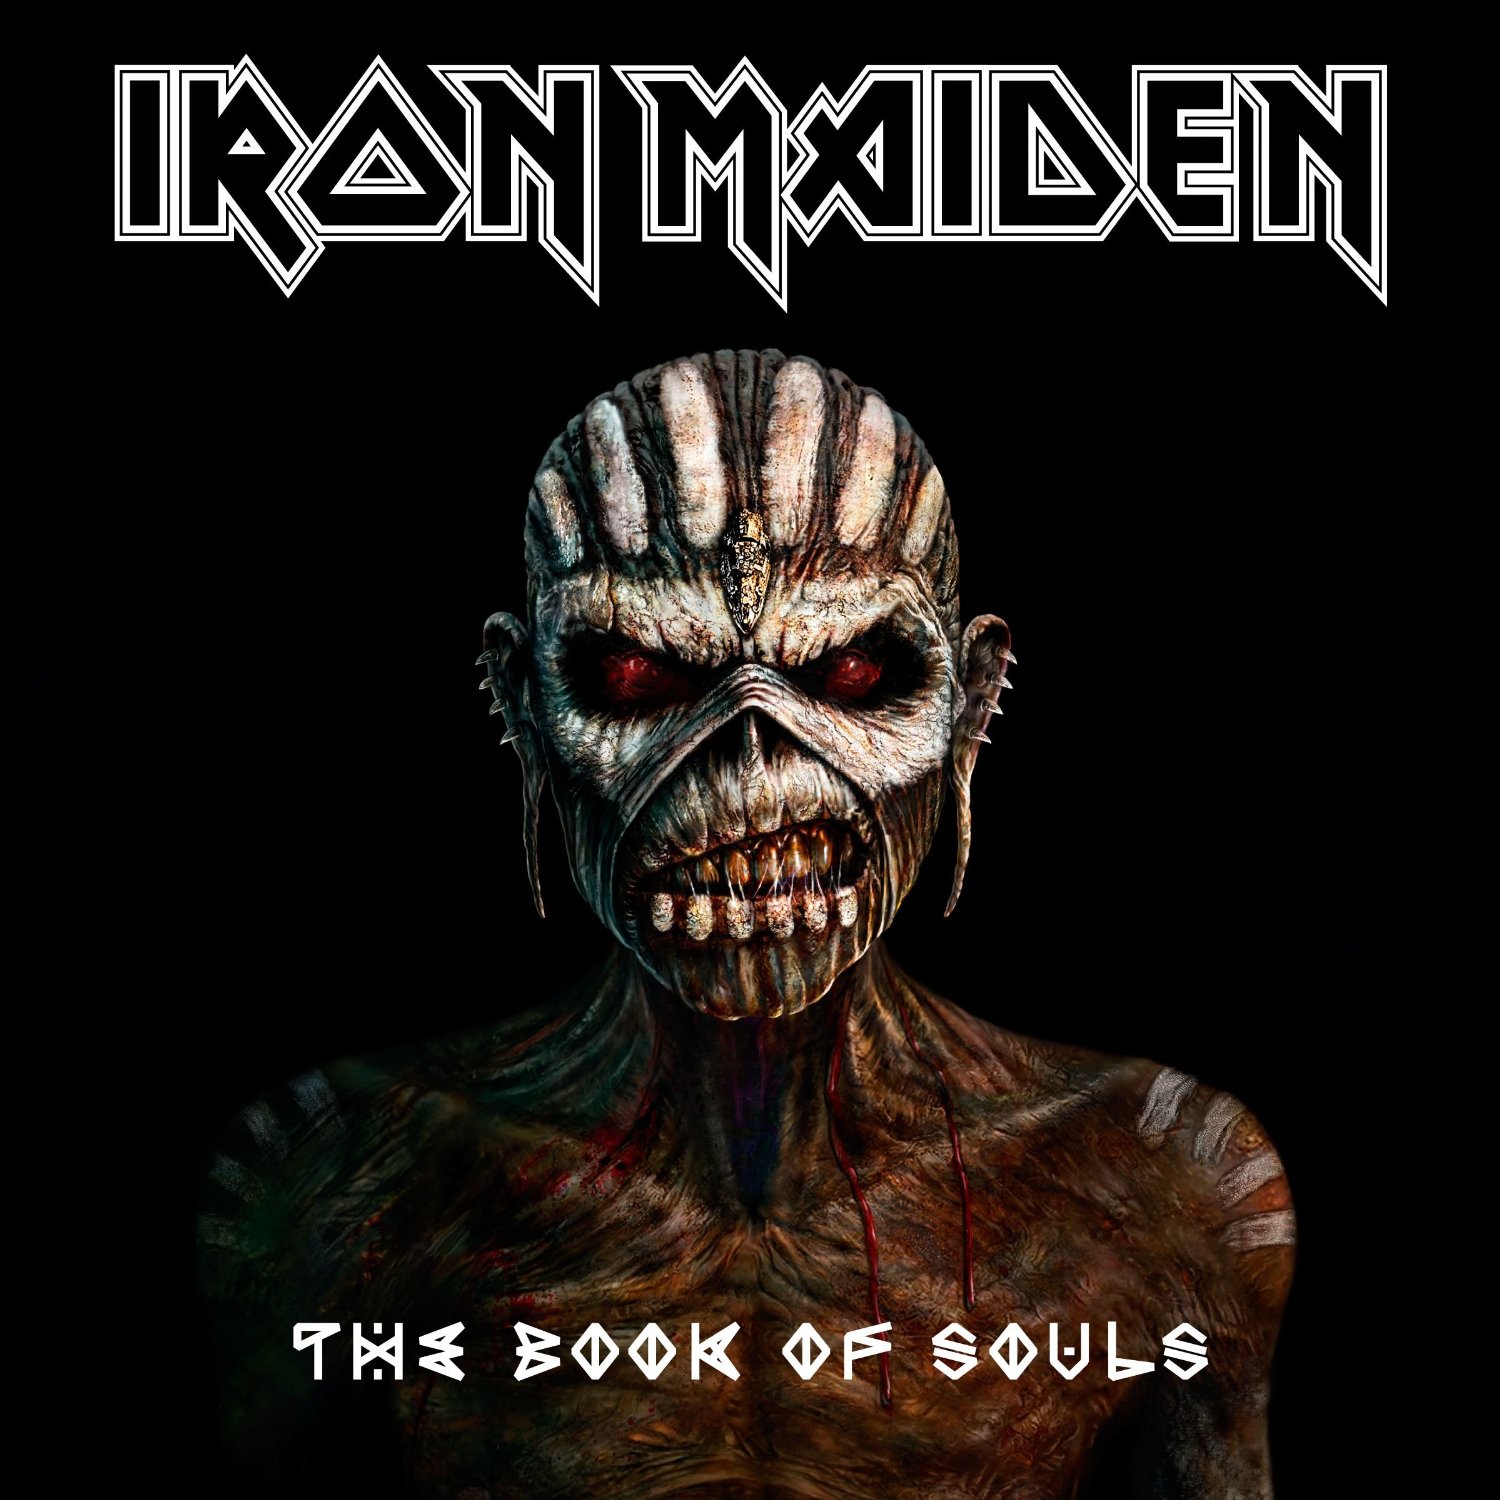 The Book of Souls by Iron Maiden